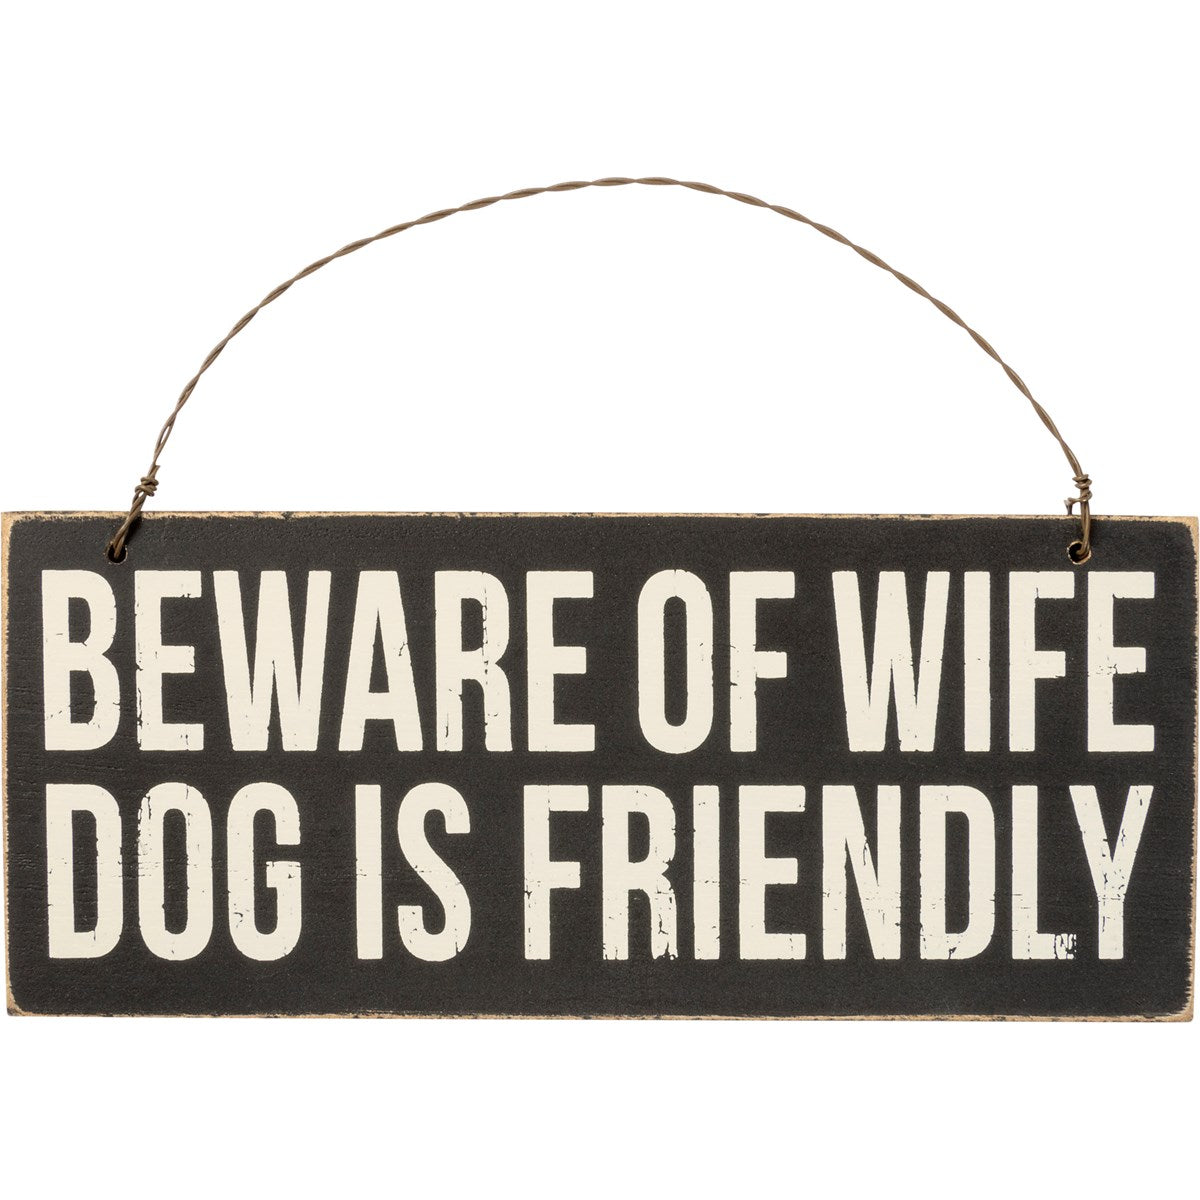 'Beware Of Wife, Dog Is Friendly' Block Sign Ornament